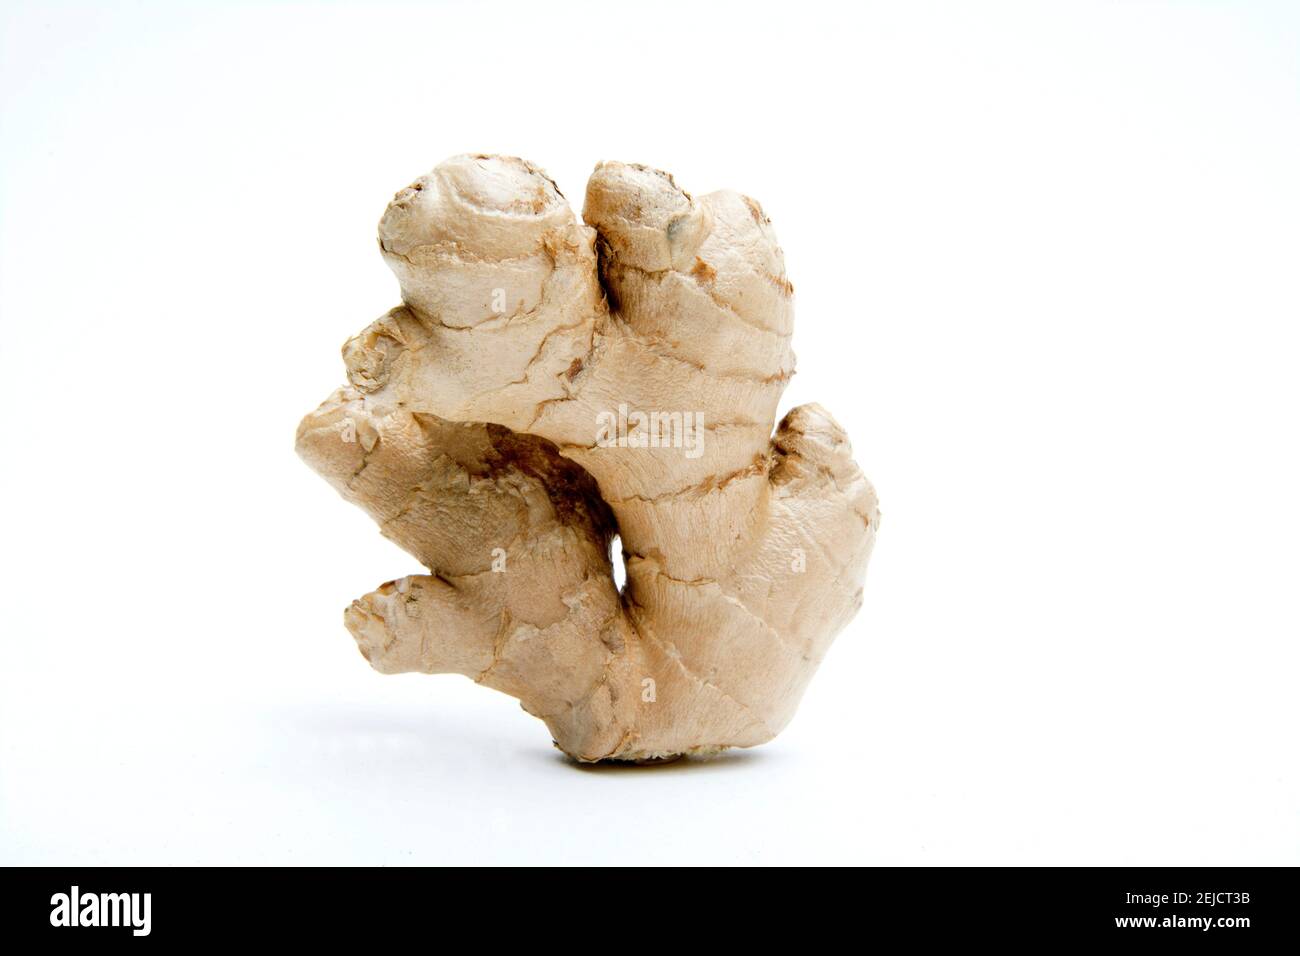 Ginger root on white background Stock Photo